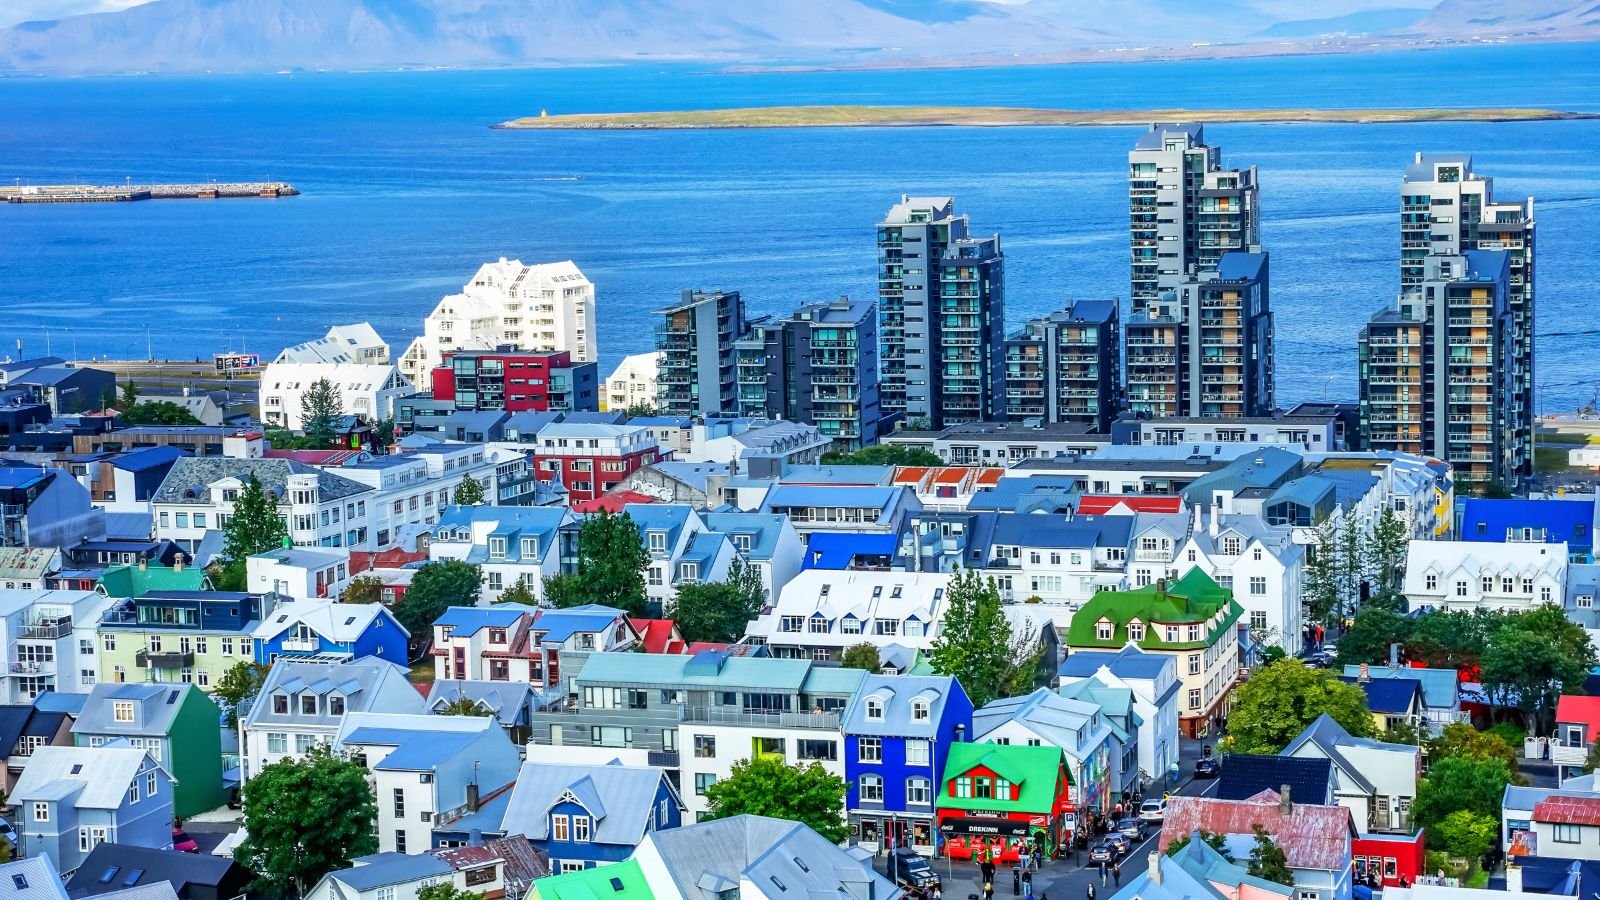 <ul> <li>Score: 8.80</li> </ul> <p>Reykjavík, Iceland’s capital, isn’t just a haven for nature lovers and a surprisingly LGBTQ+-friendly city. Iceland generally boasts a progressive stance on LGBTQ+ rights, and Reykjavík embodies this spirit. Same-sex marriage is legal in Iceland, and LGBTQ+ individuals enjoy full legal rights. Notably, in 2009, the election of Jóhanna Sigurðardóttir as Prime Minister marked a historic moment, making her the world’s<a href="https://www.reuters.com/article/idUSTRE65A3V0/#:~:text=Iceland%2C%20the%20only%20country%20in%20the%20world%20to%20have%20an%20openly%20gay%20head%20of%20state%2C%20passed%20a%20law%20on%20Friday%20allowing%20same%2Dsex%20partners%20to%20get%20married%20in%20a%20vote%20which%20met%20with%20no%20political%20resistance." rel="noopener"> first openly LGBT head of government</a>. Reykjavík hosts one of the world’s best Pride events. The annual parade draws a diverse crowd, celebrating love, diversity, and equality with gusto. As an LGBTQ+ traveler,  one can Reykjavík freely. Public displays of affection are welcomed, and the city’s tolerant and progressive atmosphere ensures a positive and safe experience.</p>